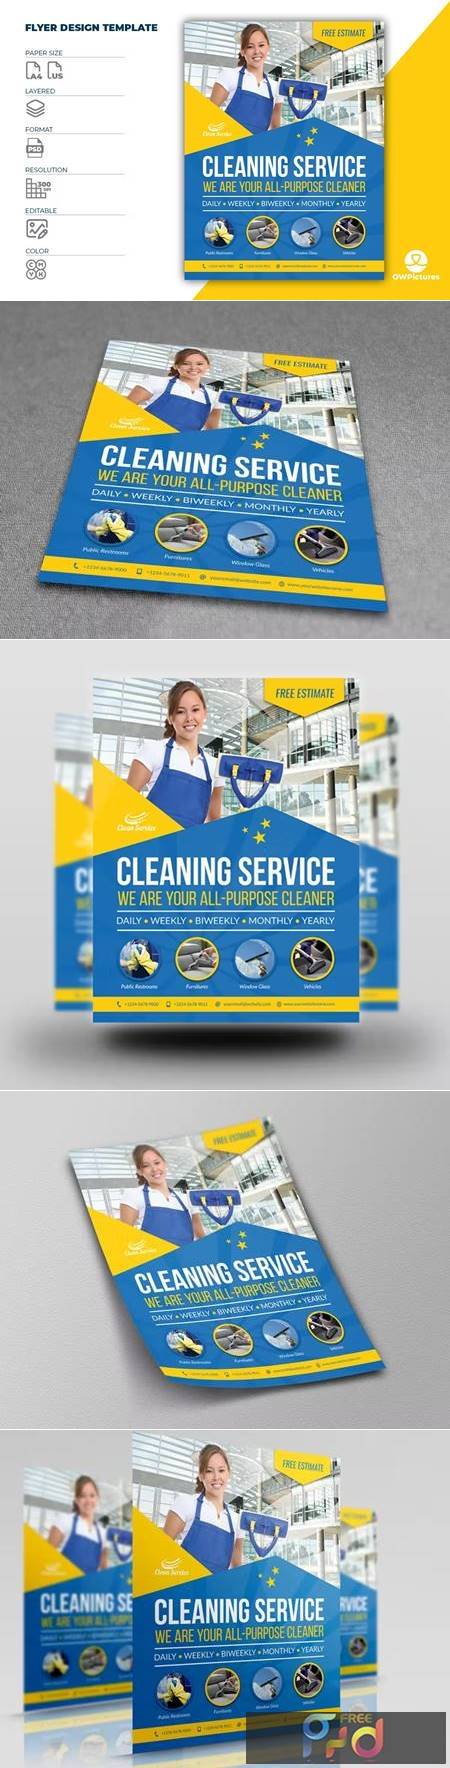 Cleaning Services Flyer Template VAS8K68 1